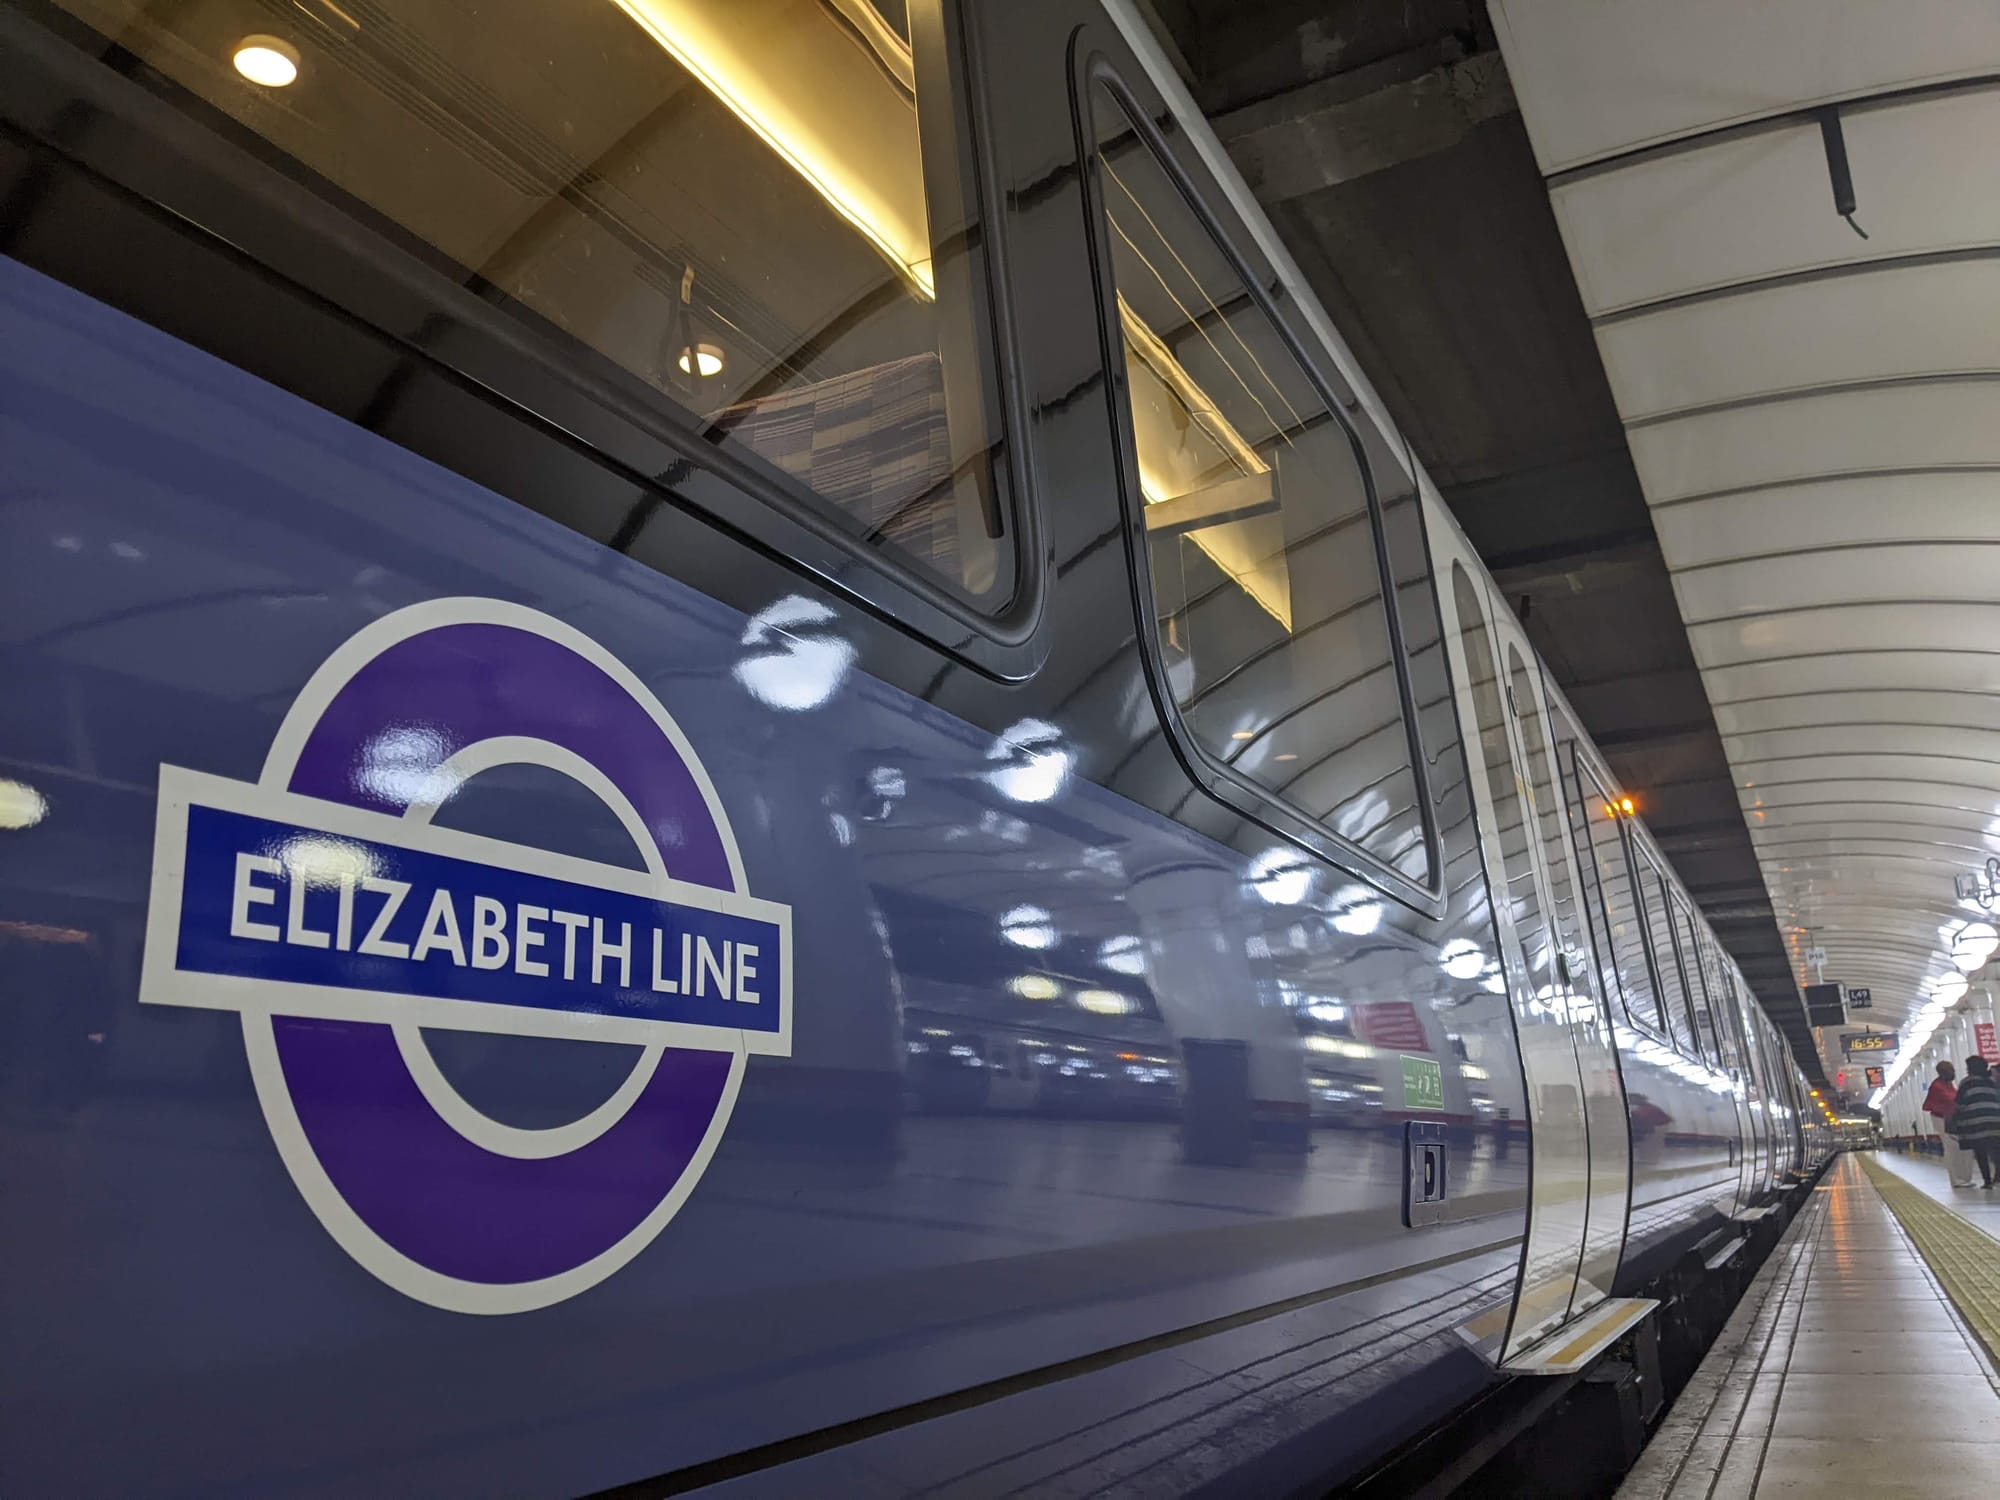 A close-up of the side of an Elizabeth line train, which bears a deep purple roundel with 'Elizabeth line' across the centre in white font.